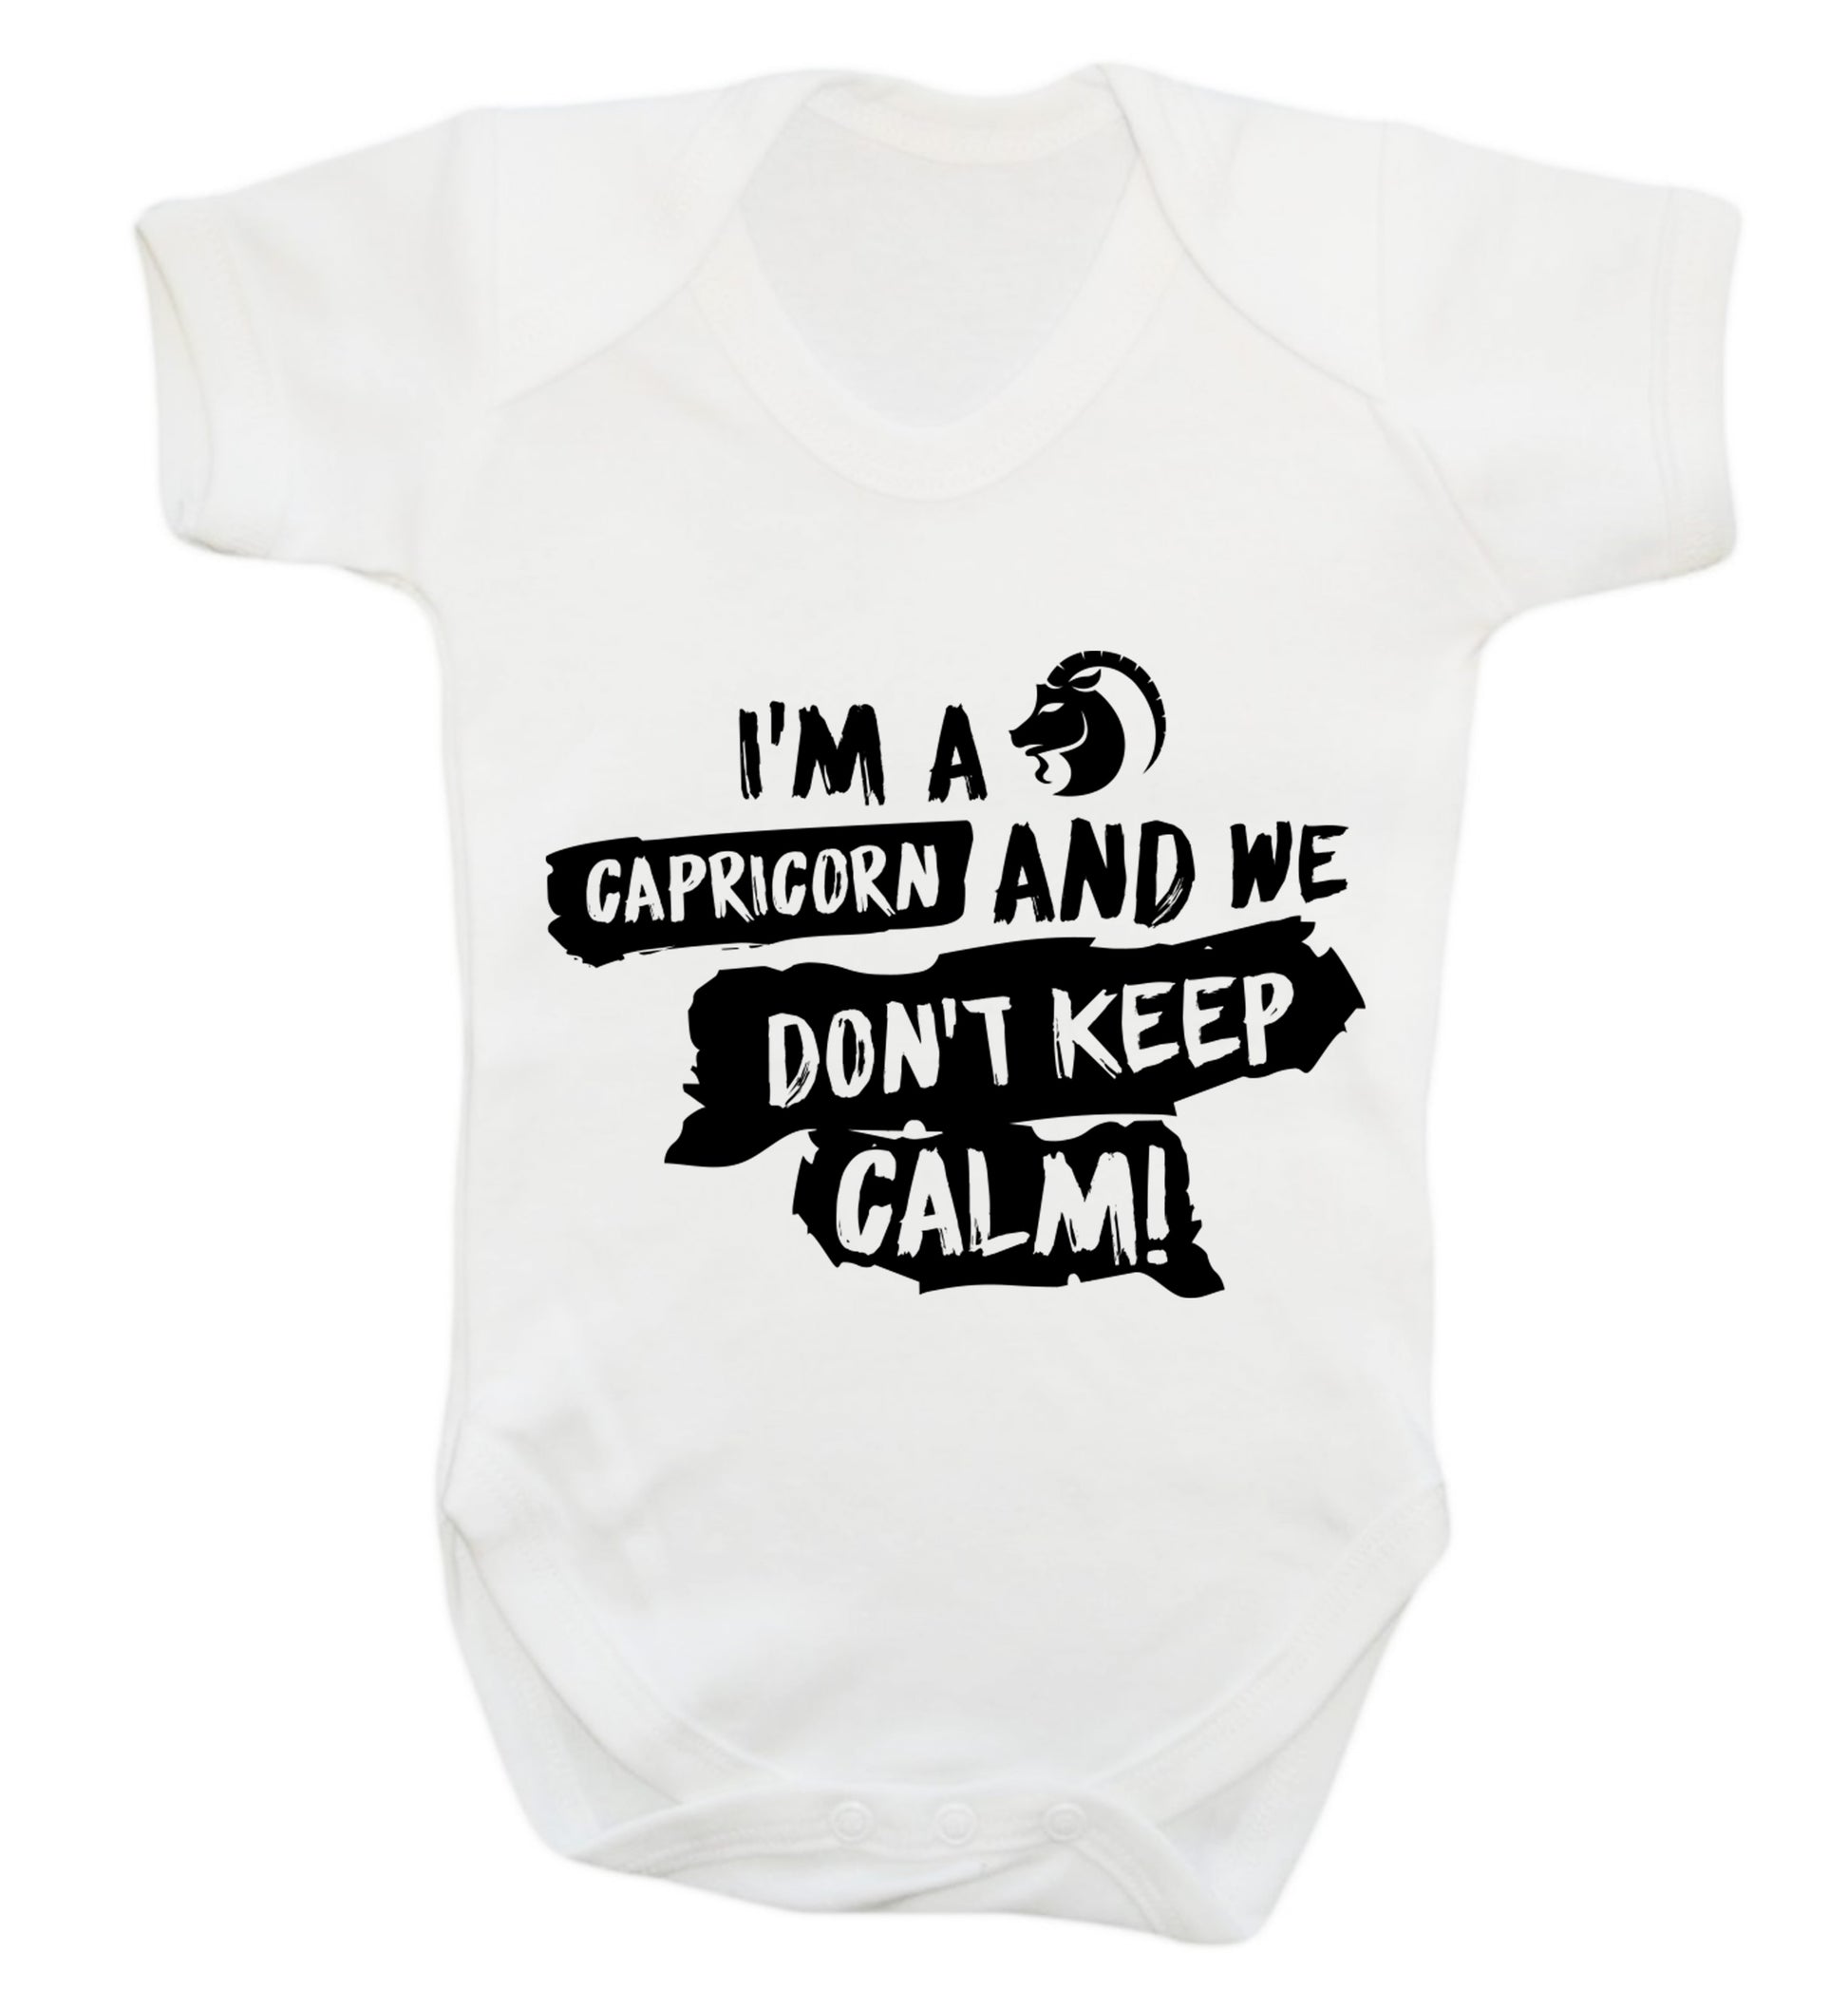 I'm a capricorn and we don't keep calm Baby Vest white 18-24 months